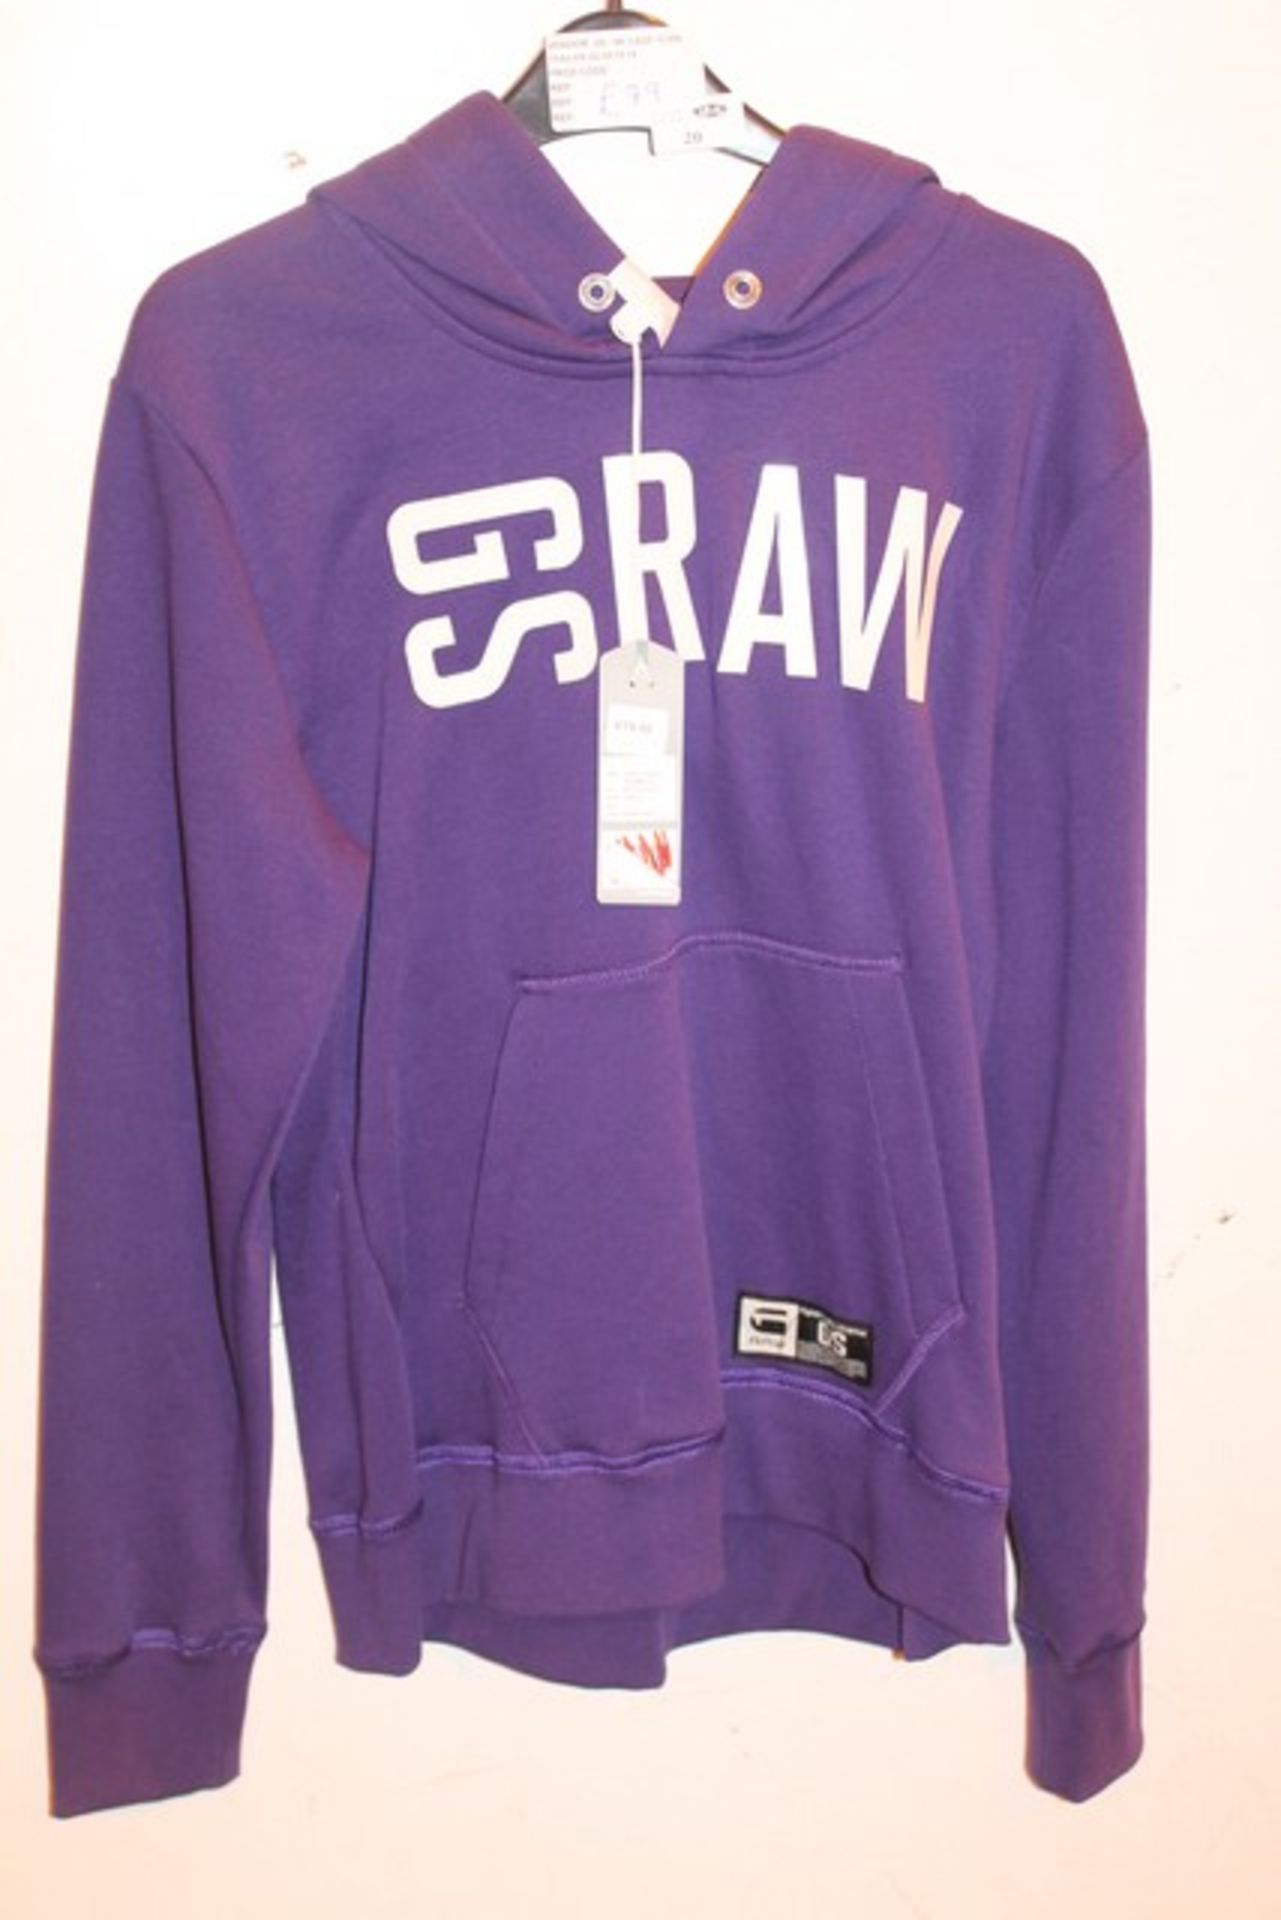 1 x GSTAR RAW SIZE LARGE PURPLE BARRON SWEATER RRP £80 (CAGE 12.008)  *PLEASE NOTE THAT THE BID